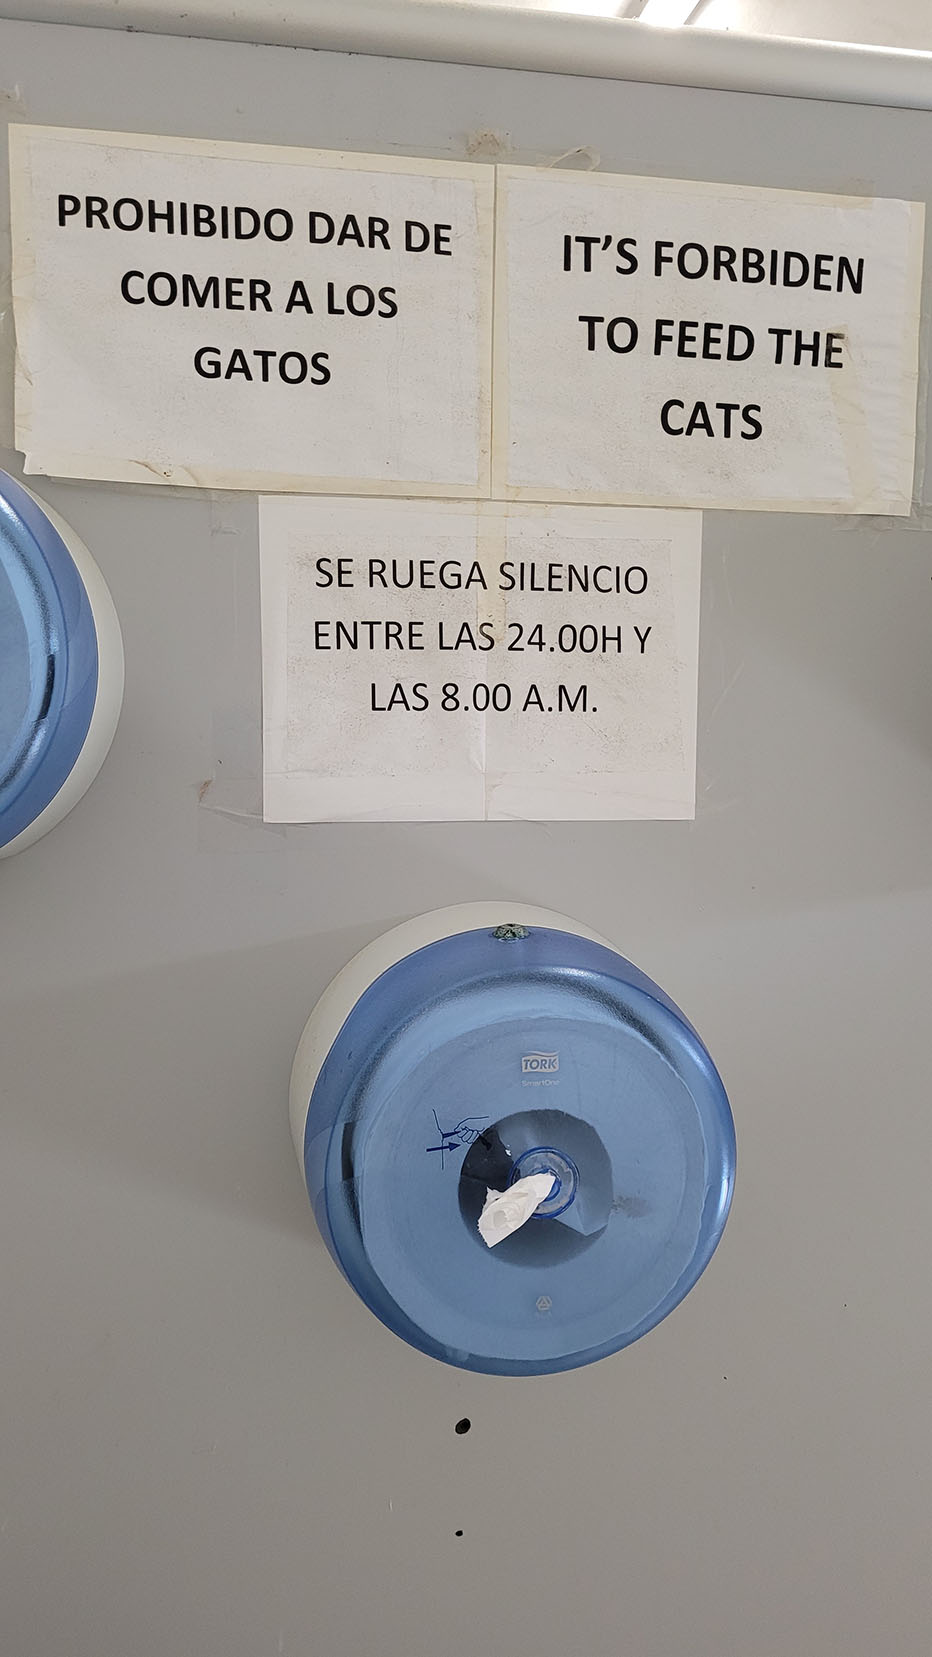 It is forbidden to feed the cats